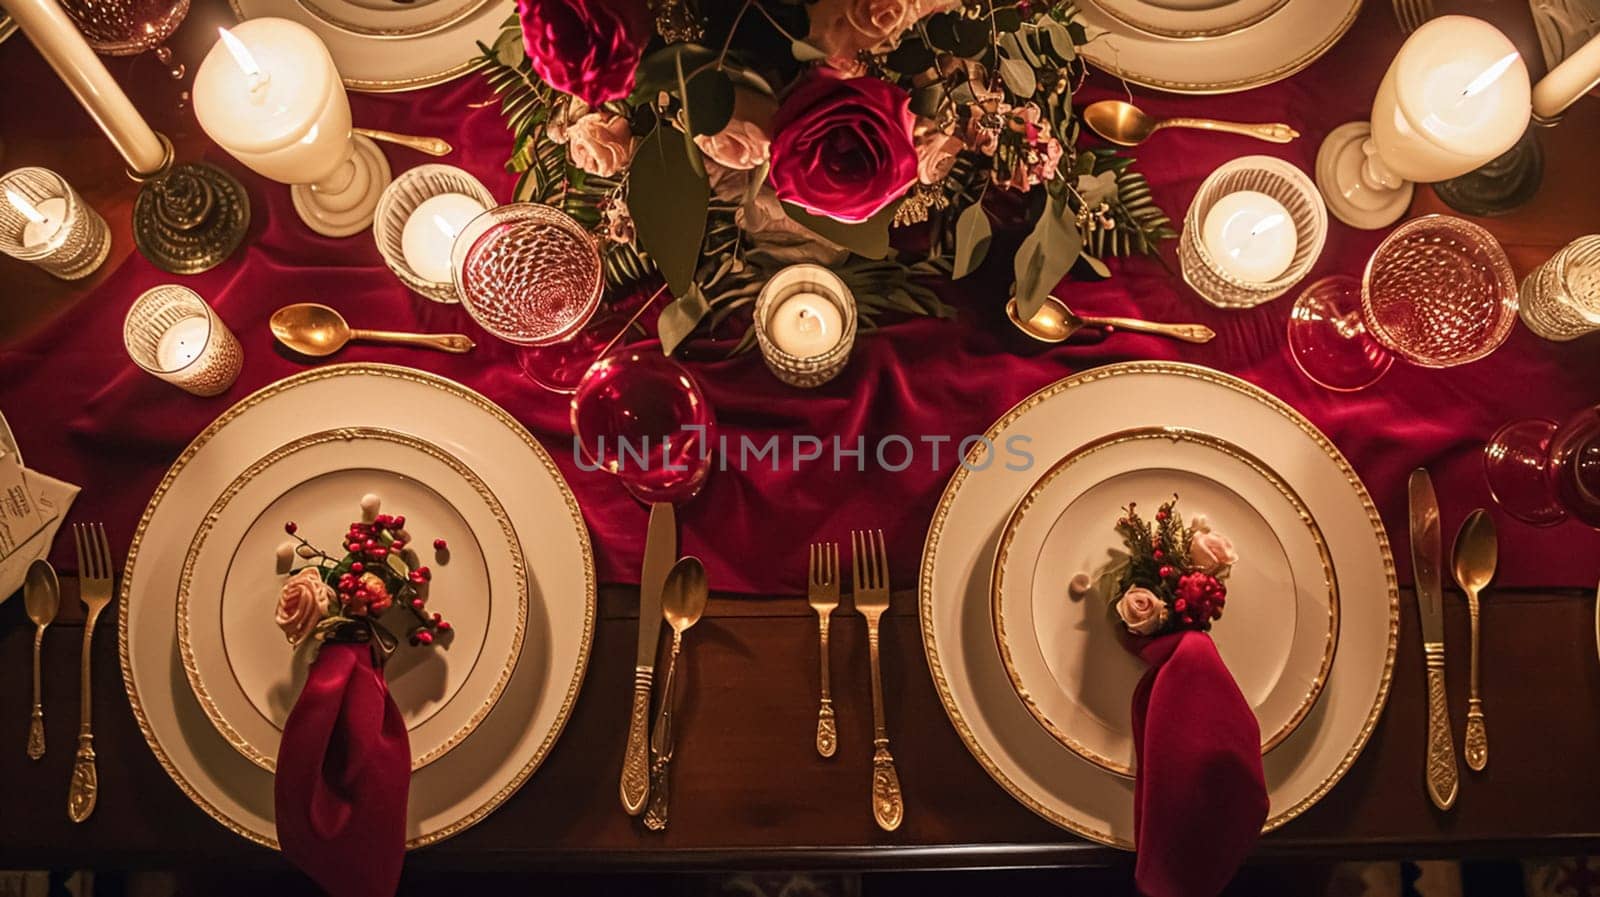 Valentines day tablescape and table decor, romantic table setting with flowers, formal dinner and date, beautiful cutlery and tableware design